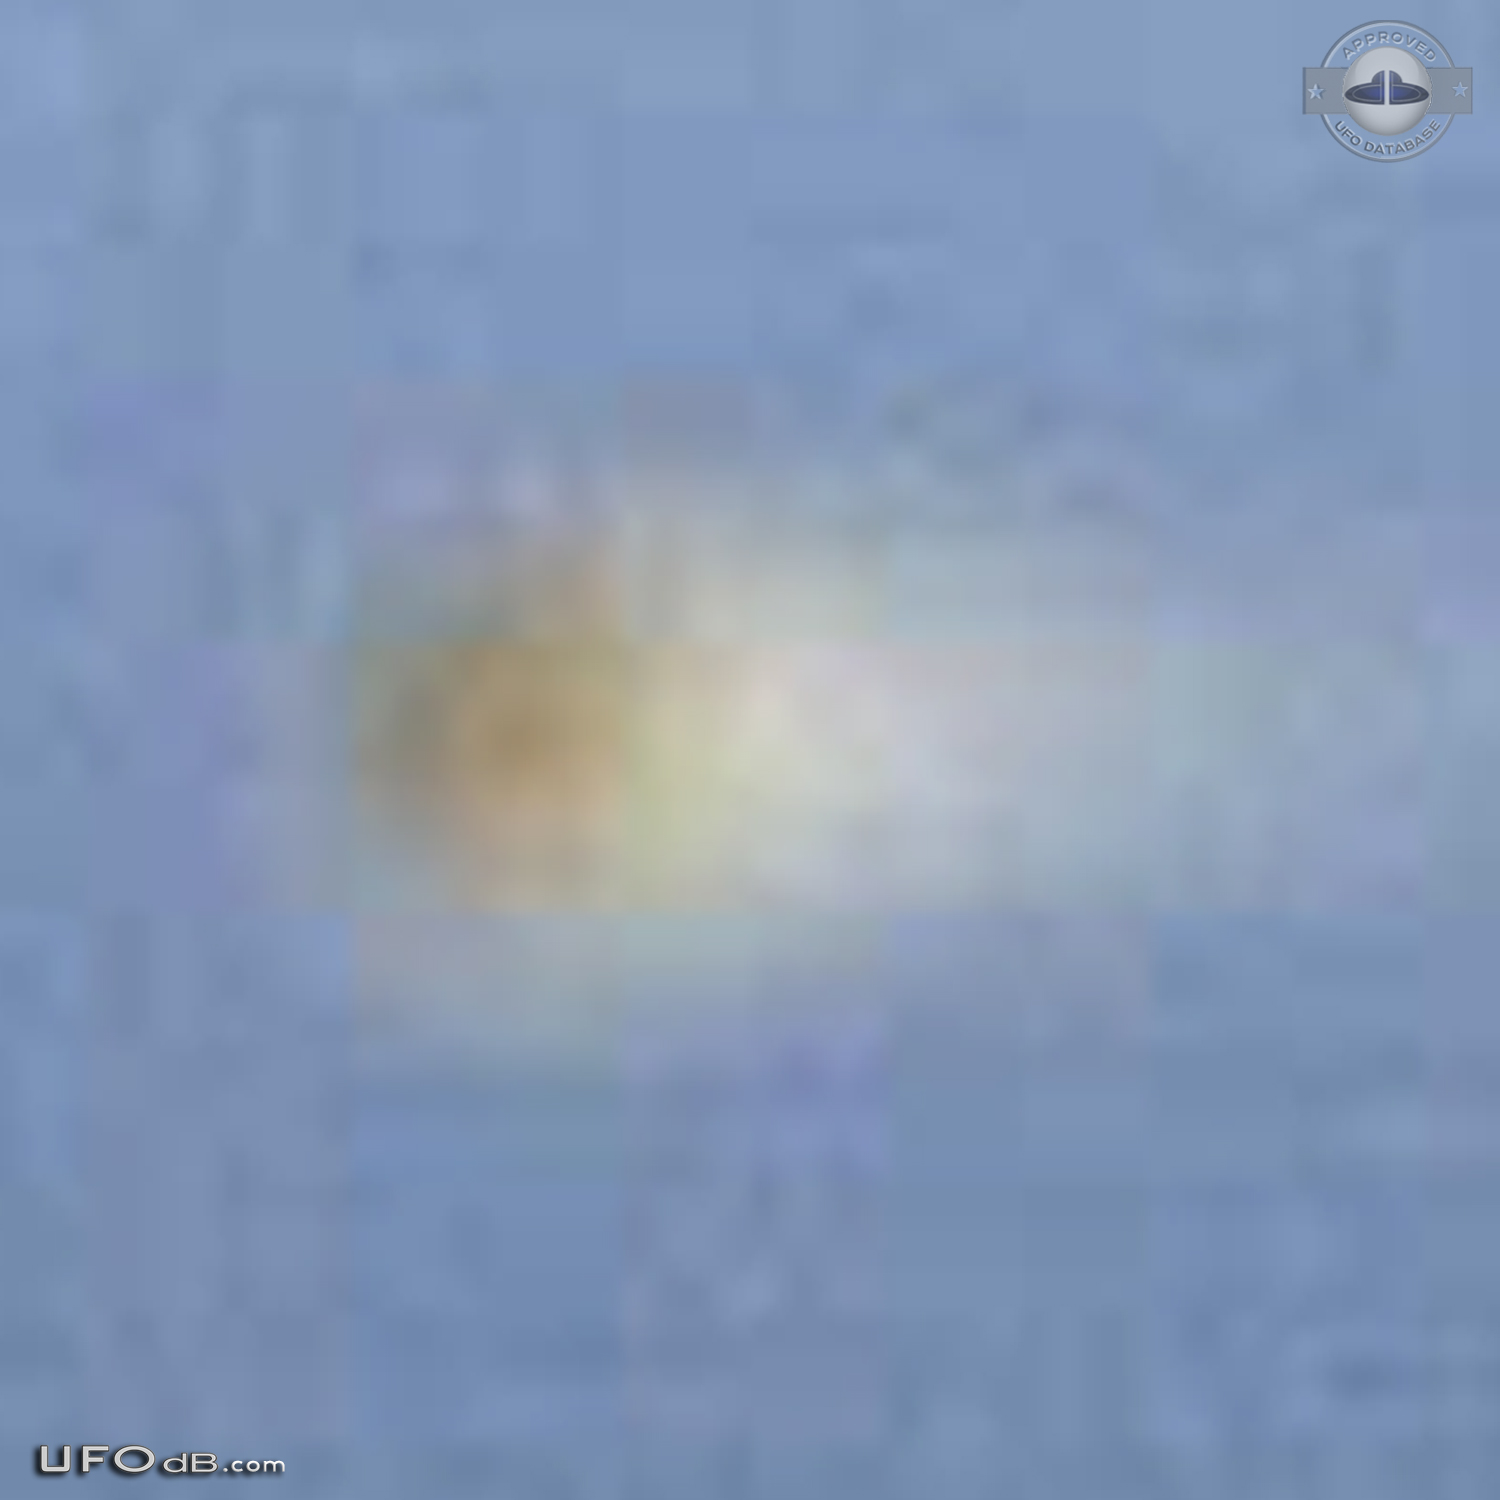 Sphere UFO with smoking tail seen near Table mountain, Cape Town 2004 UFO Picture #456-5